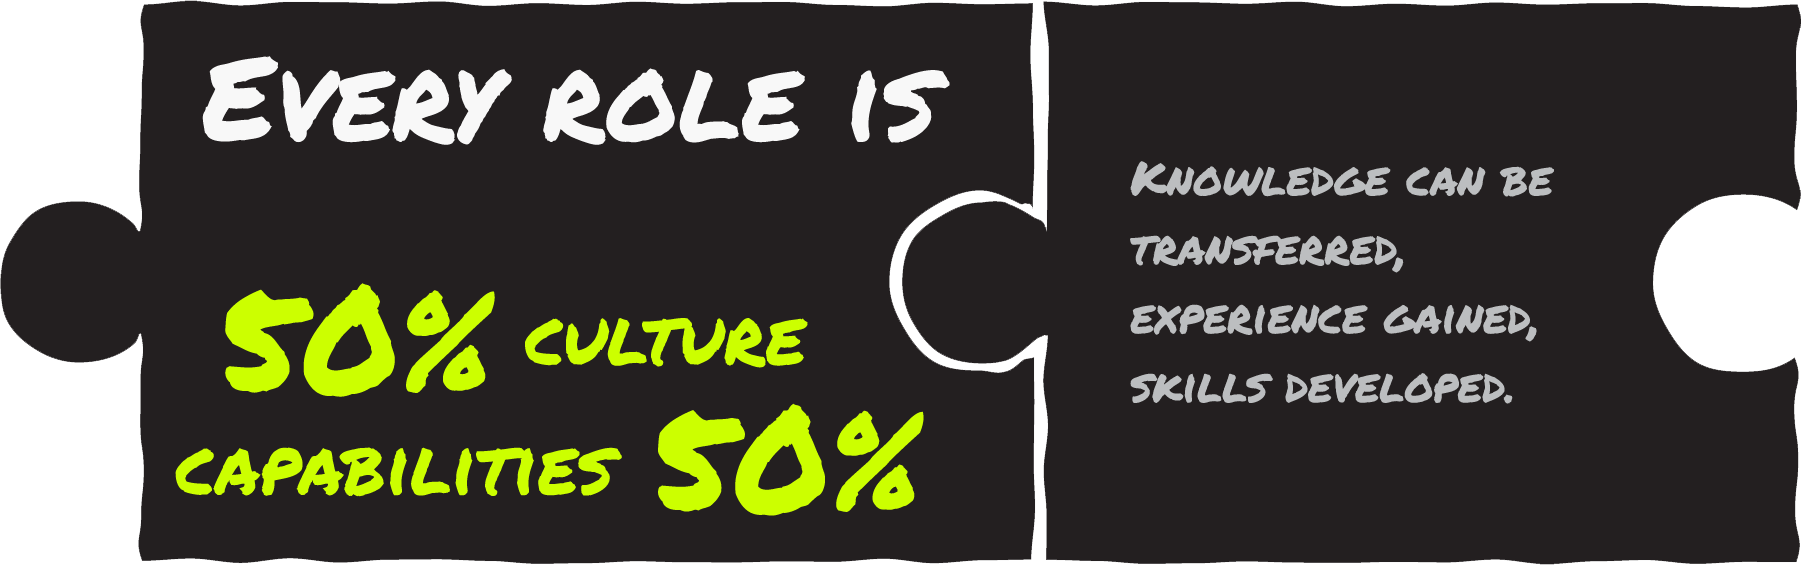 Puzzle pieces explaining that culture is 50% and capabilities is 50% - thinking from Dave Slemen & Anna Edwards